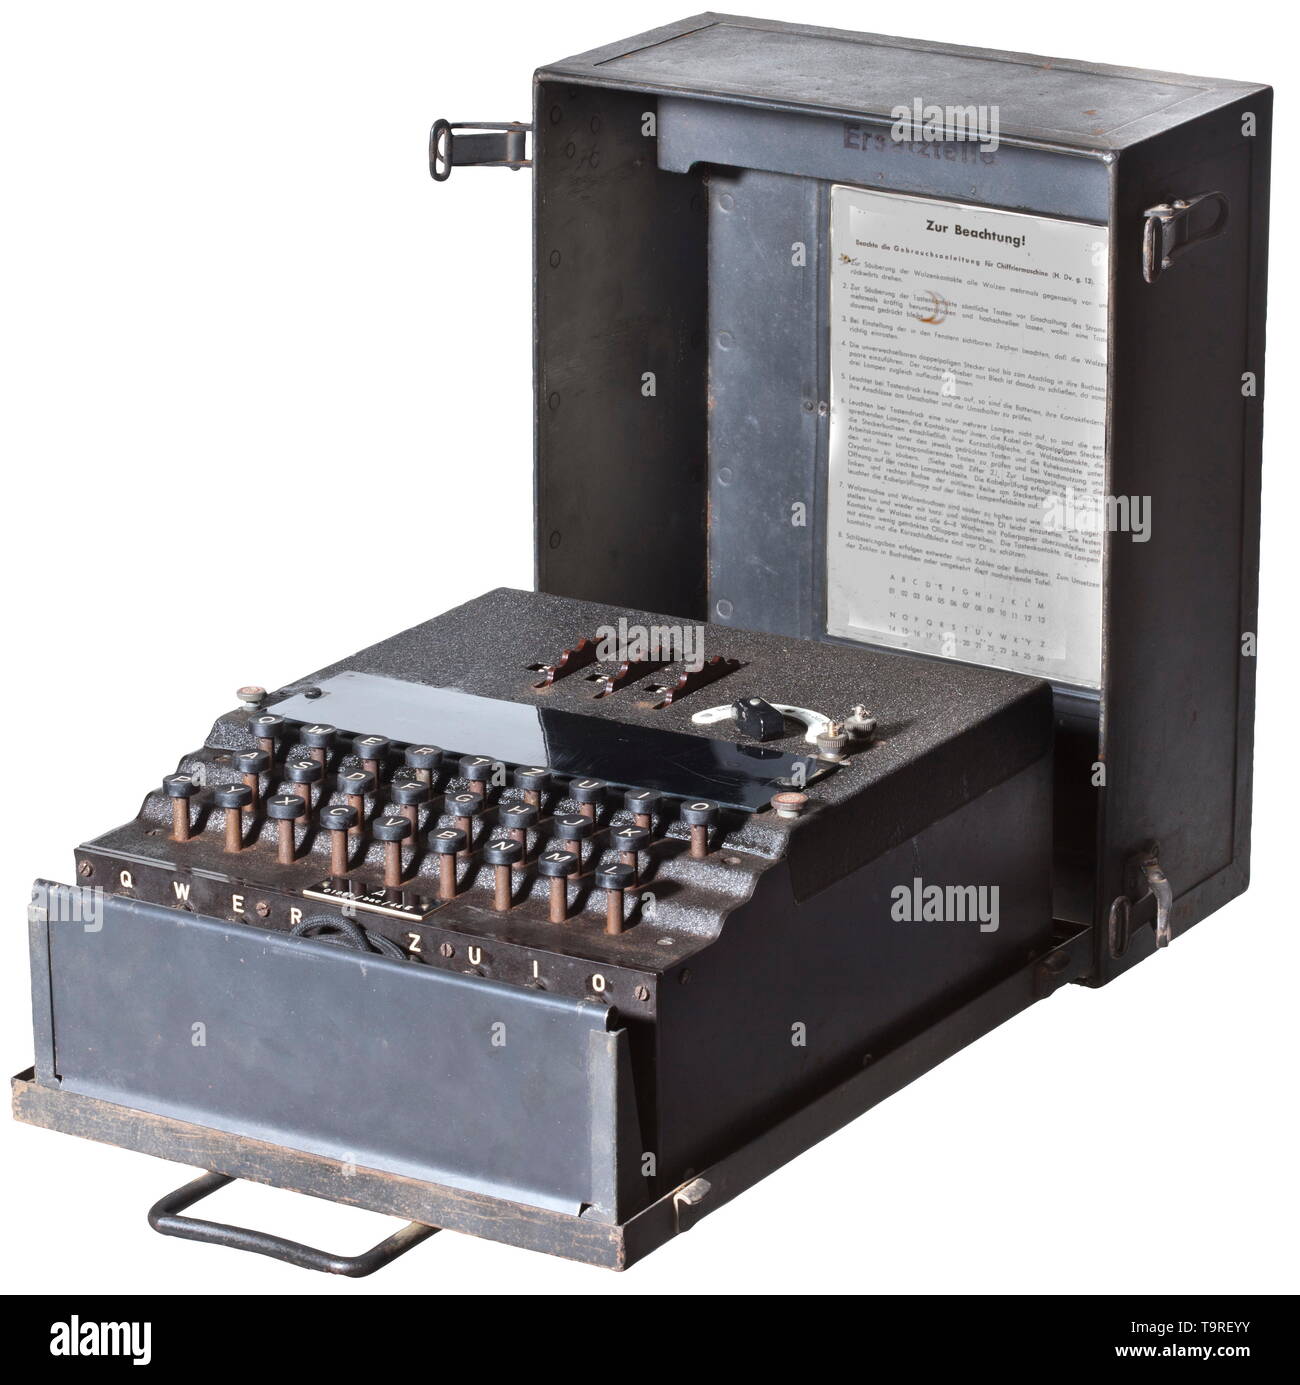 A German 'Enigma I' cipher machine, 1944 army issue, in the original carrying case Appliance number 'A 01891', manufactured 20th century, Editorial-Use-Only Stock Photo